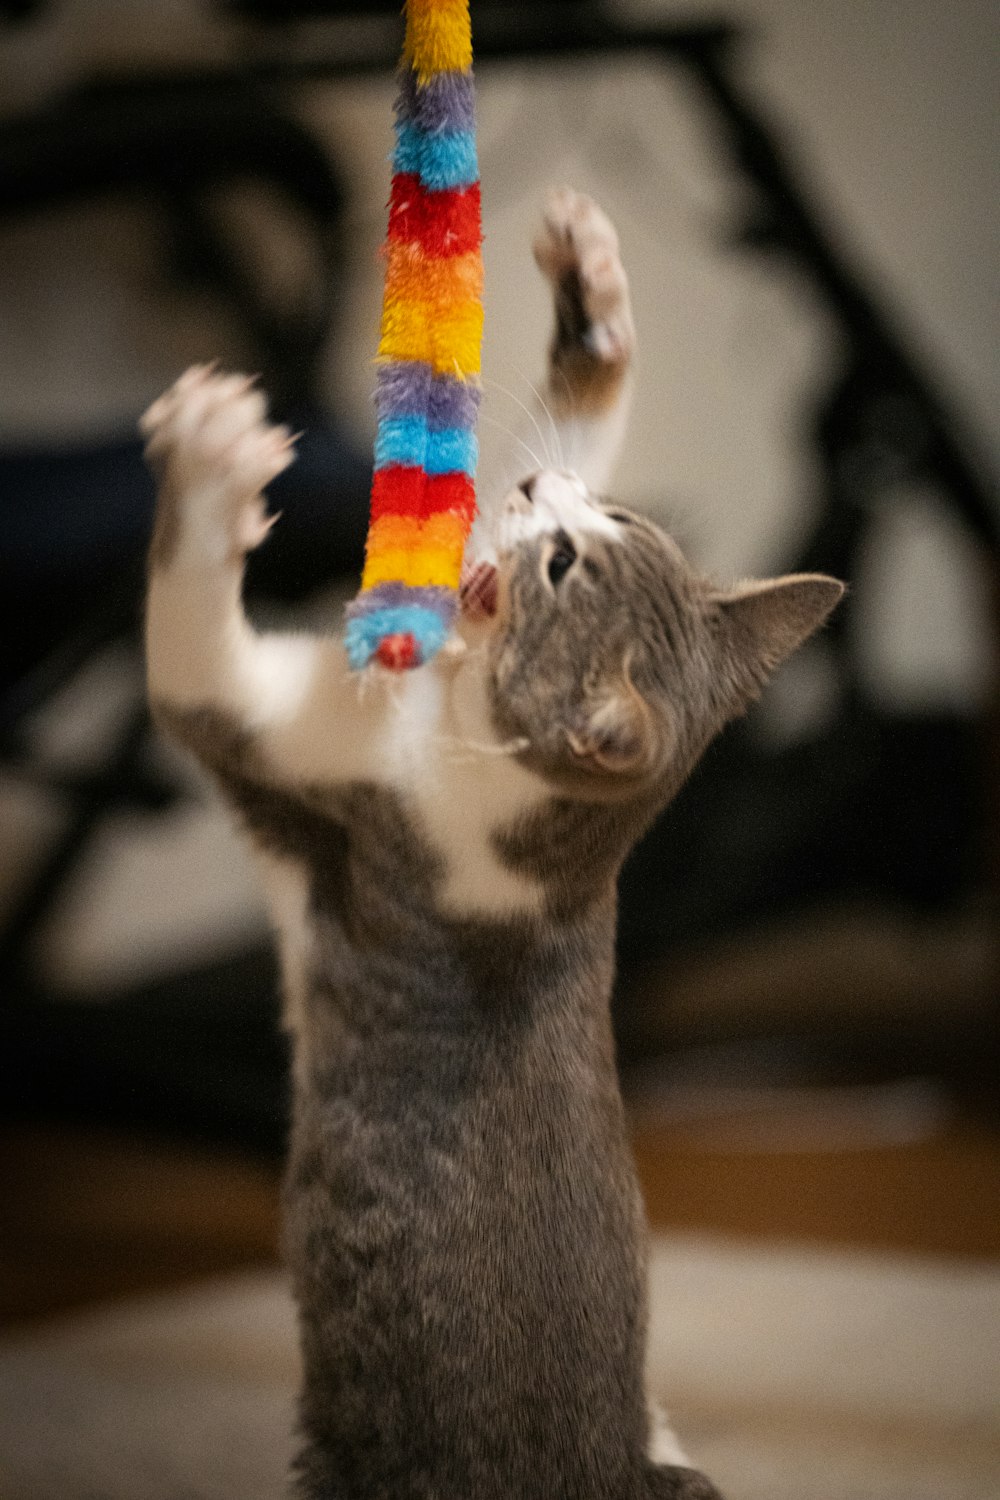 a cat is playing with a colorful toy